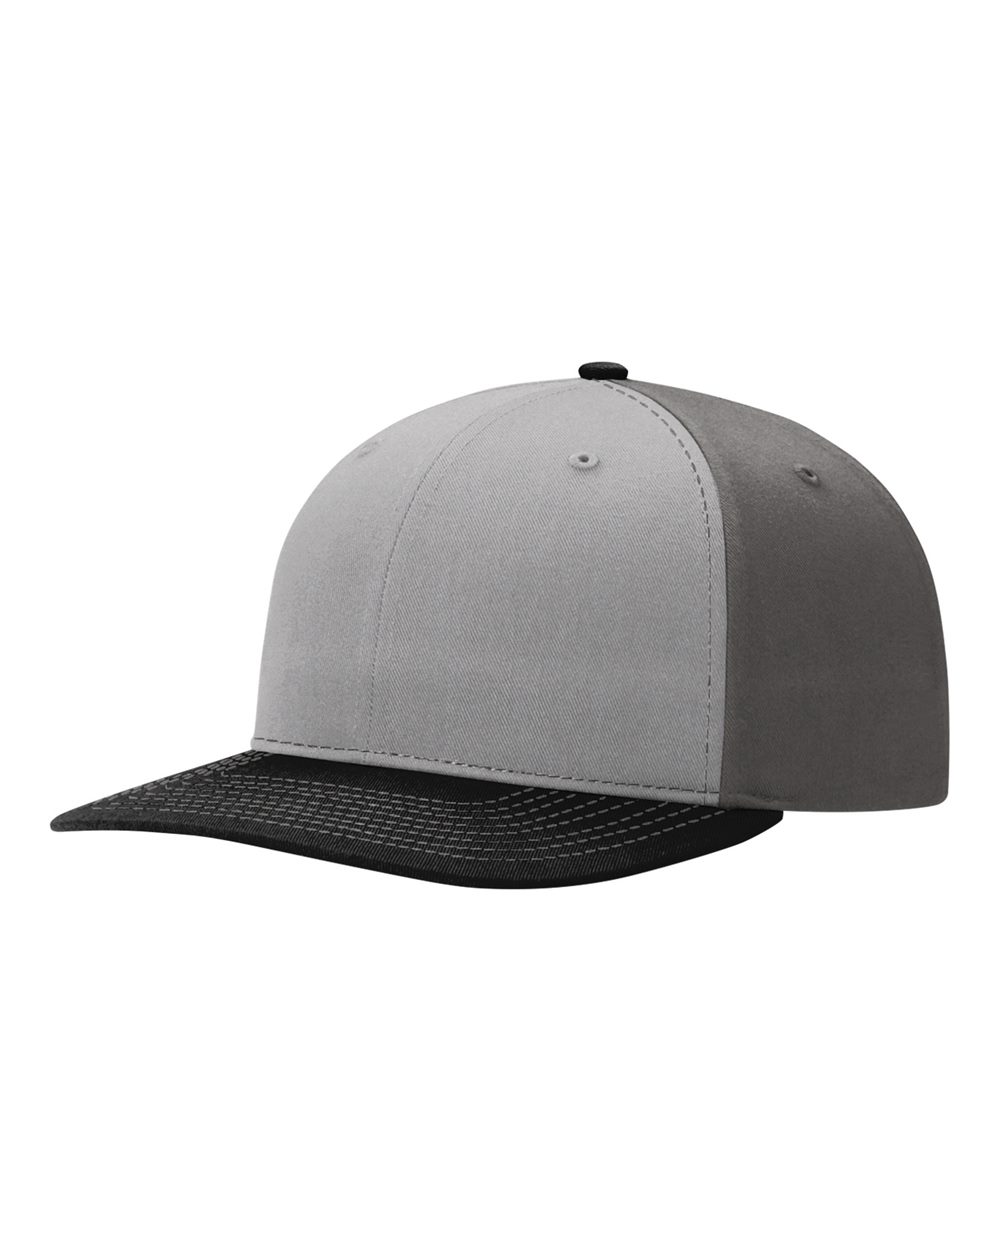 click to view Grey/ Charcoal/ Black